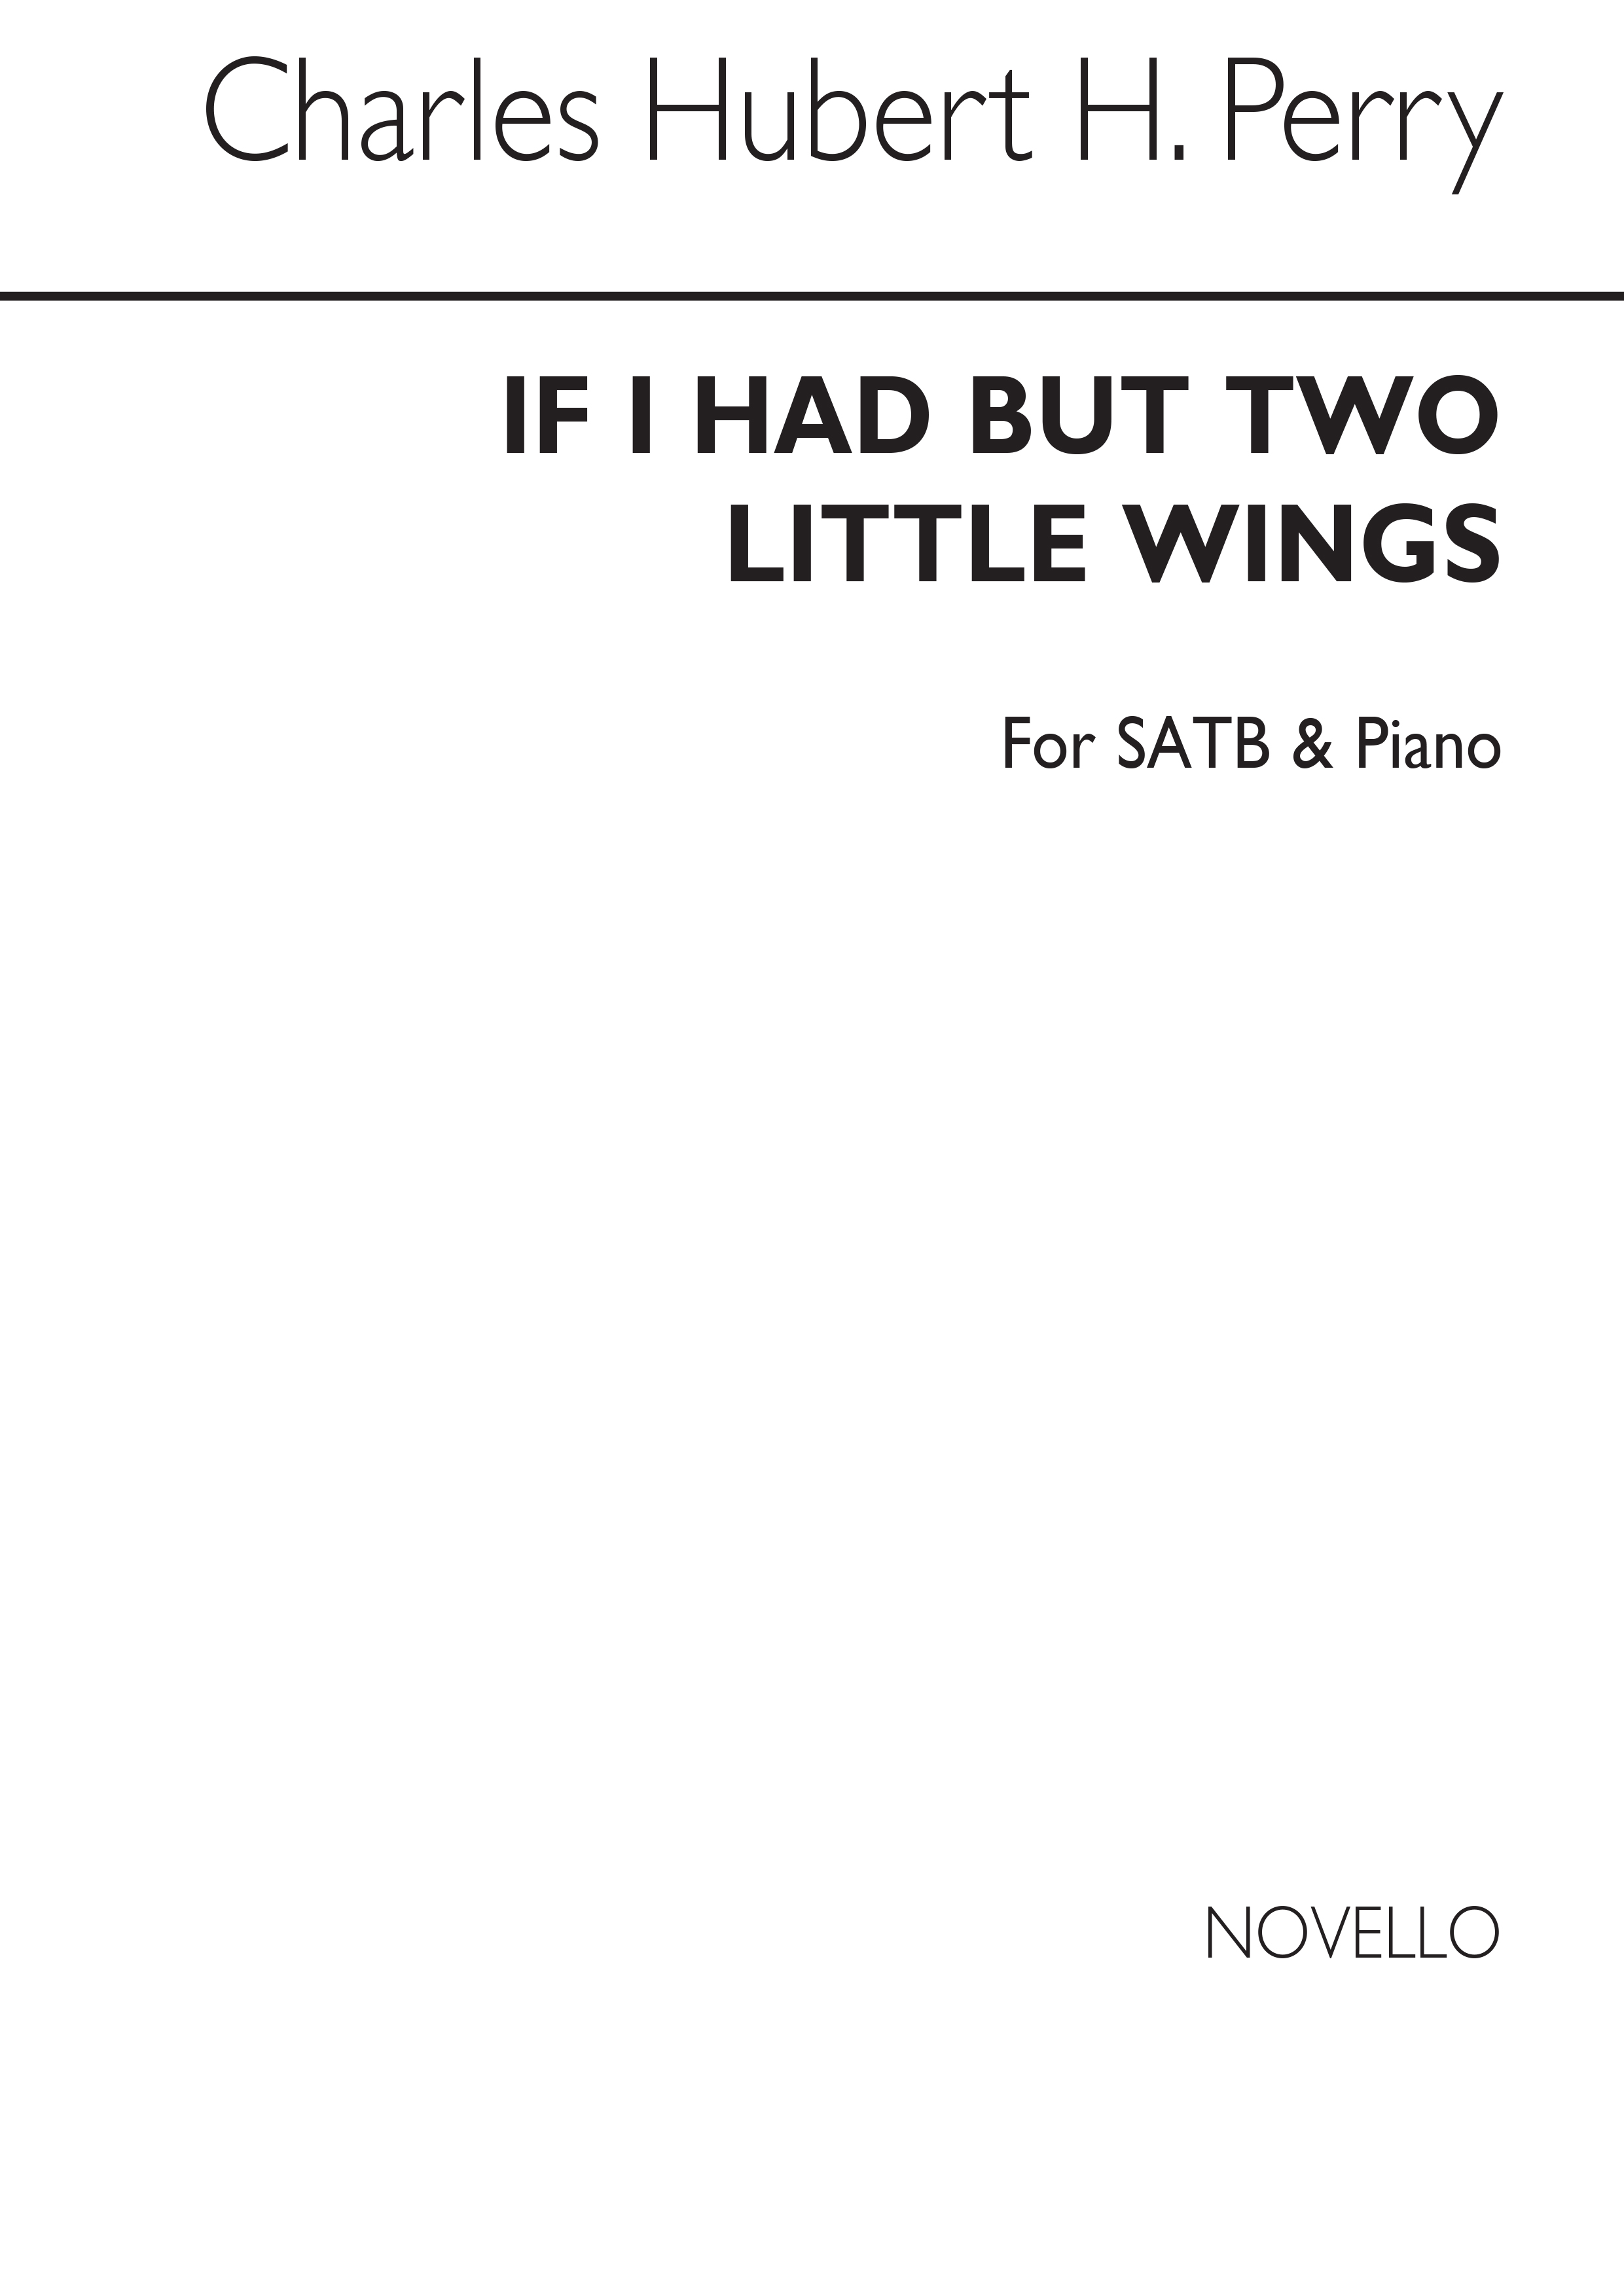 Hubert Parry: If I Had But Two Little Wings: SATB: Vocal Score